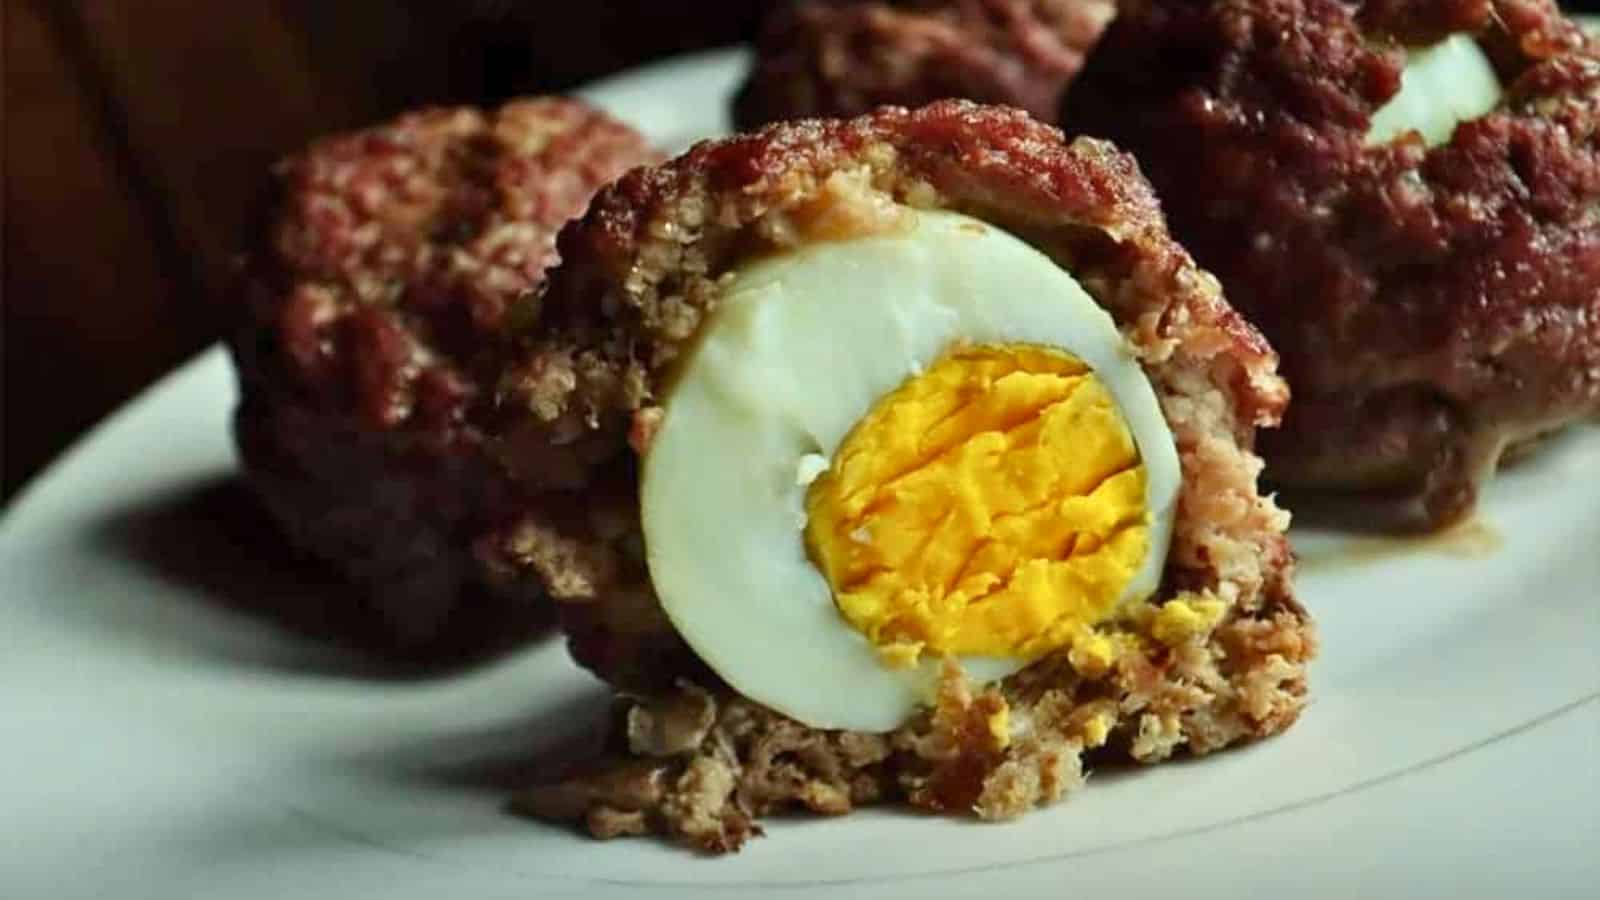 Keto scotch eggs with ground beef one cut in half.